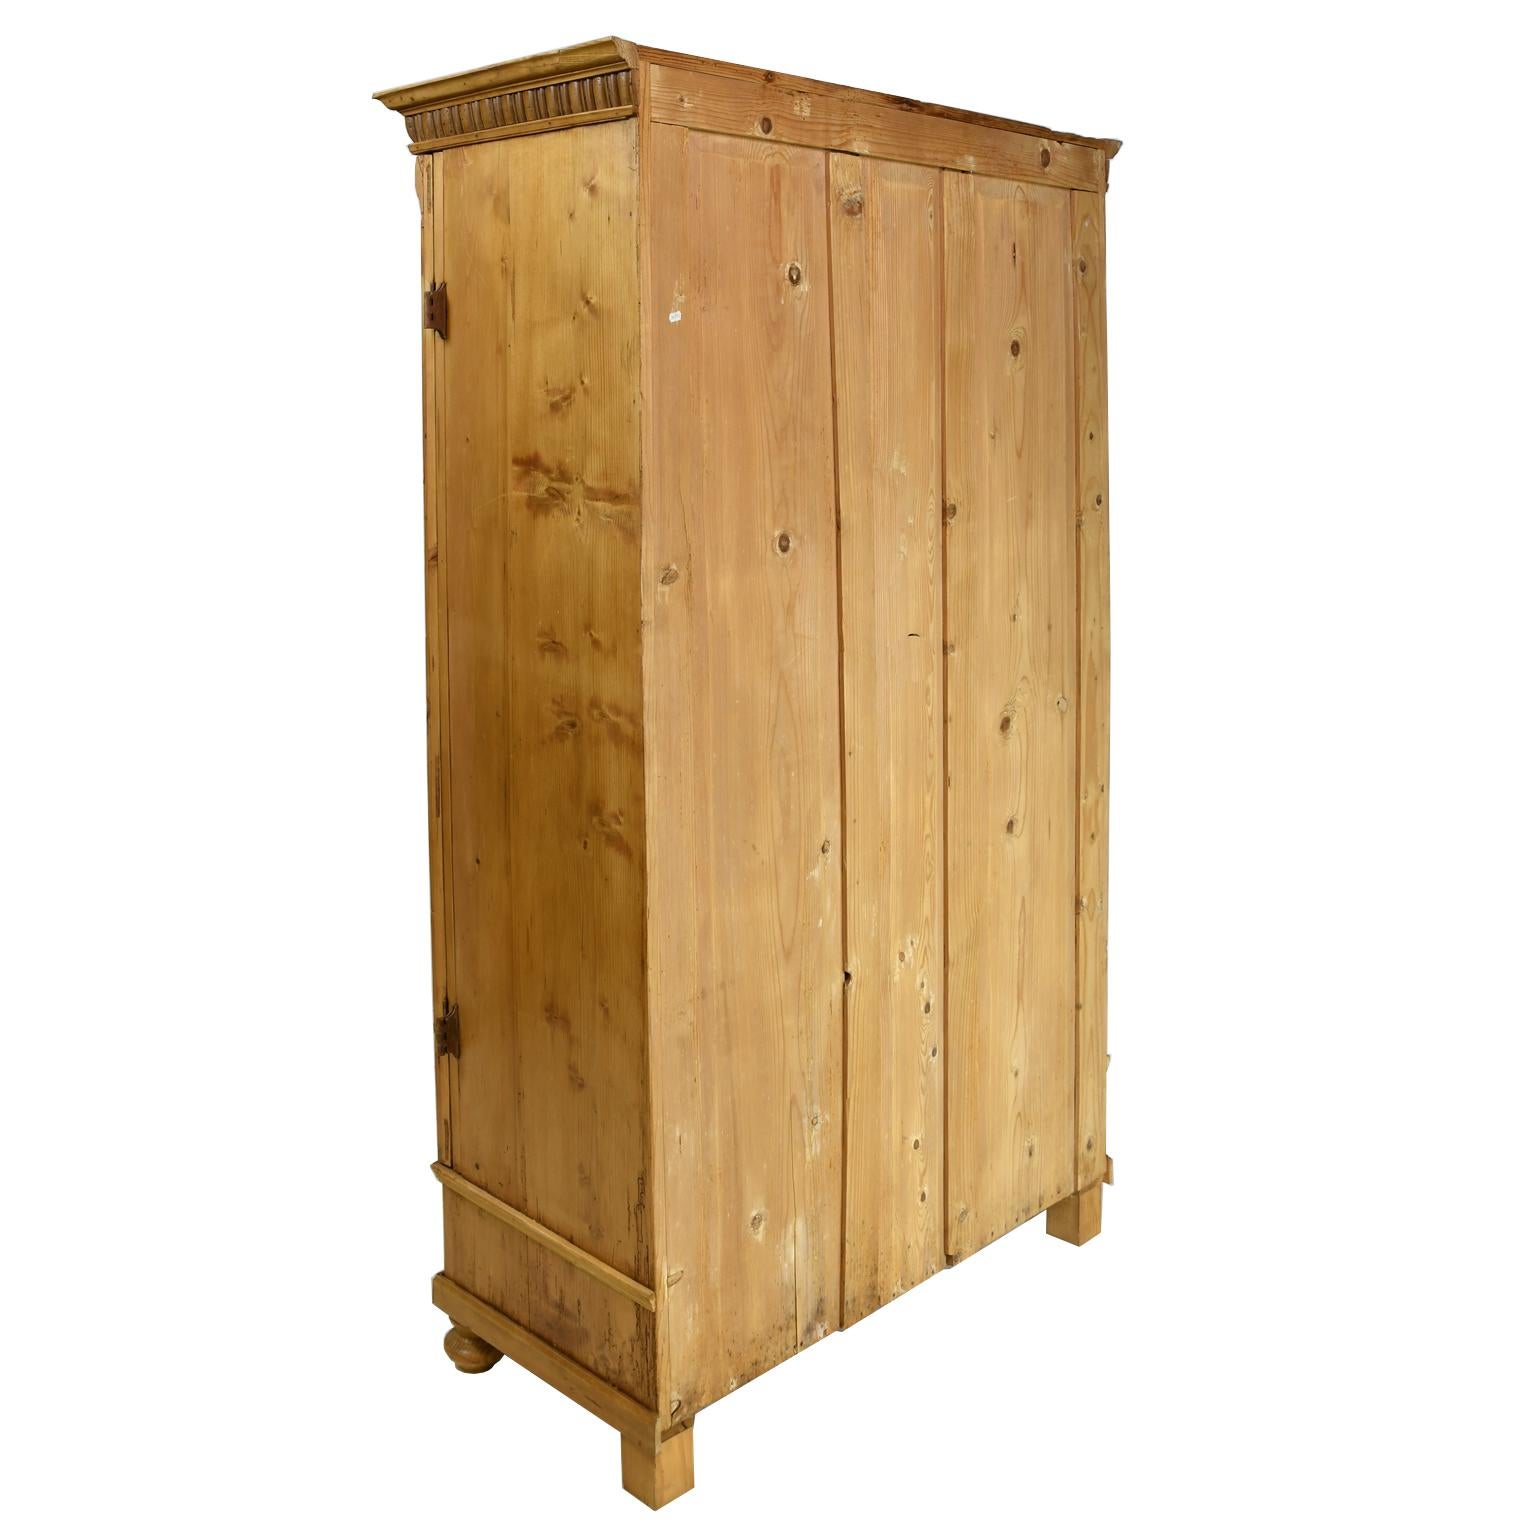 Austrian/ Hungarian Rustic Pine Armoire, circa 1840 with Parliament Hinges 3